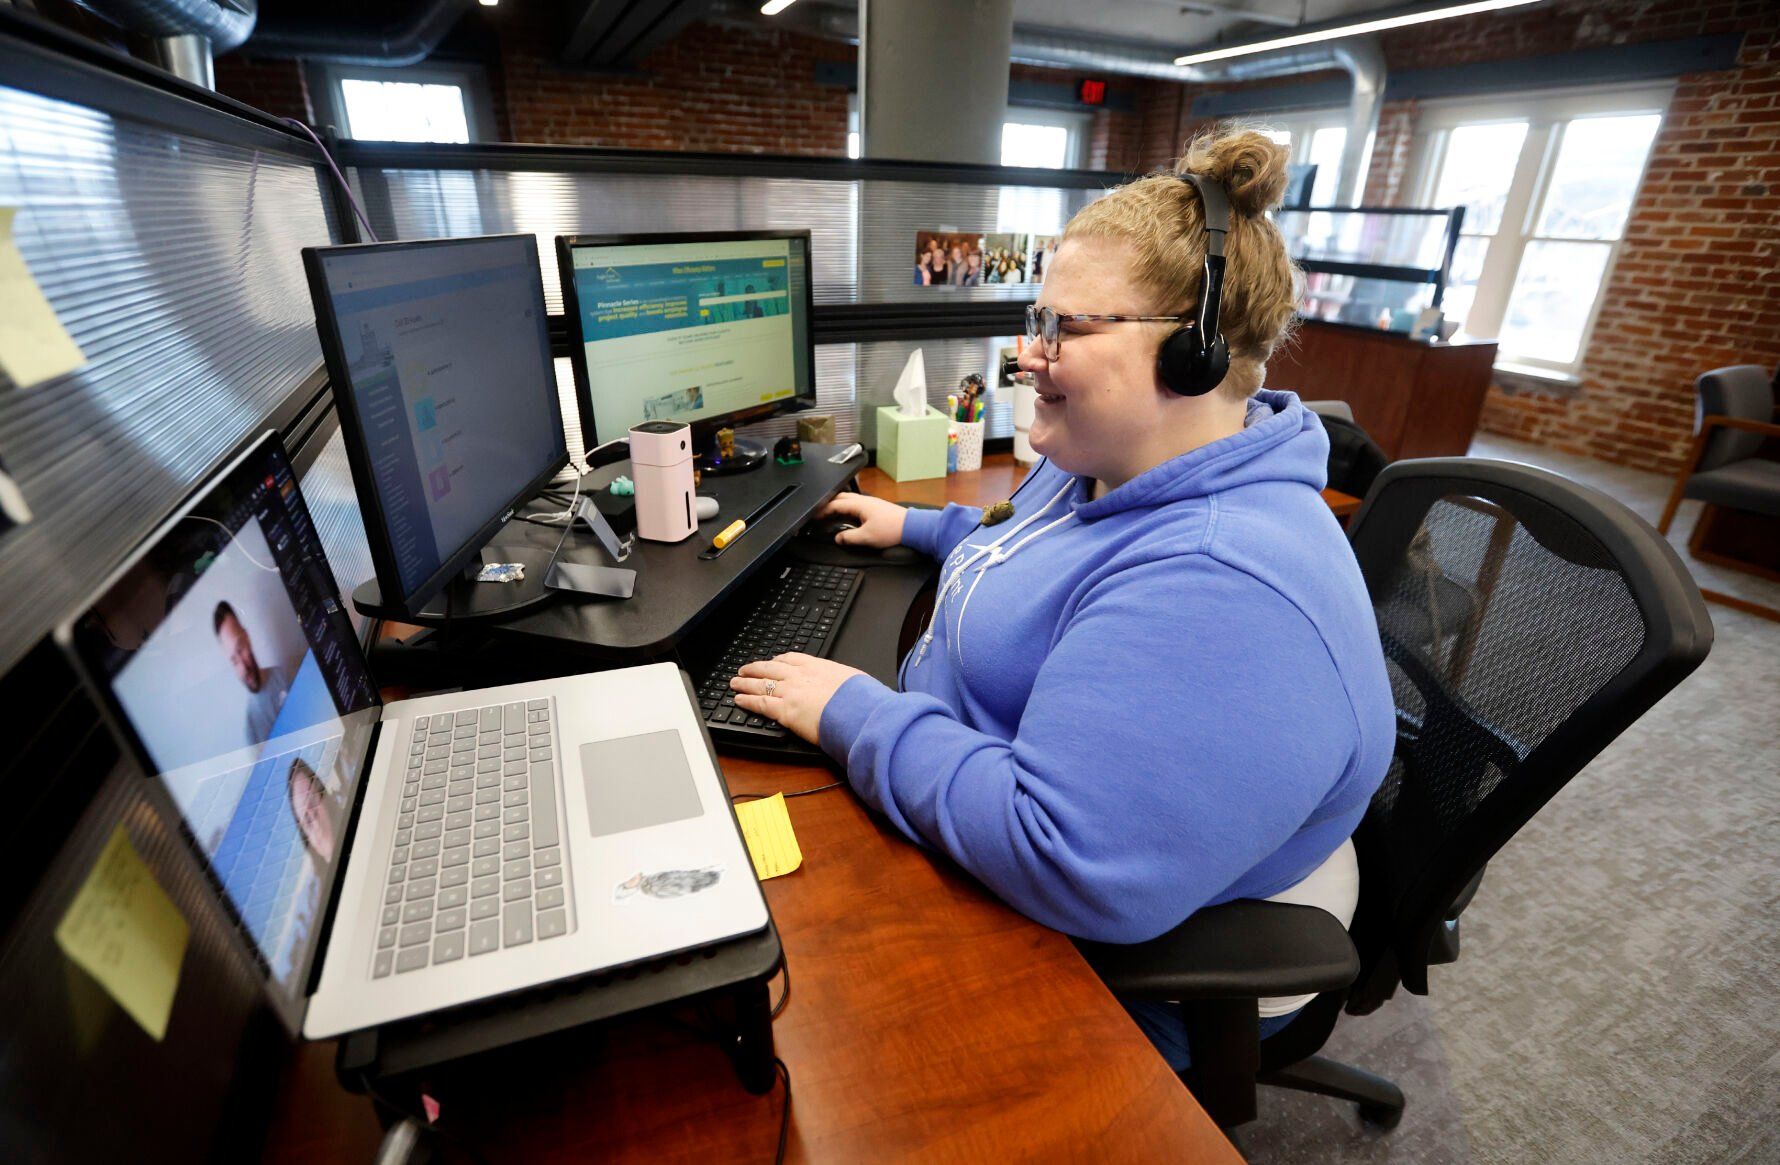 Jenni Runde talks to employees during a virtual meeting.    PHOTO CREDIT: JESSICA REILLY
Telegraph Herald